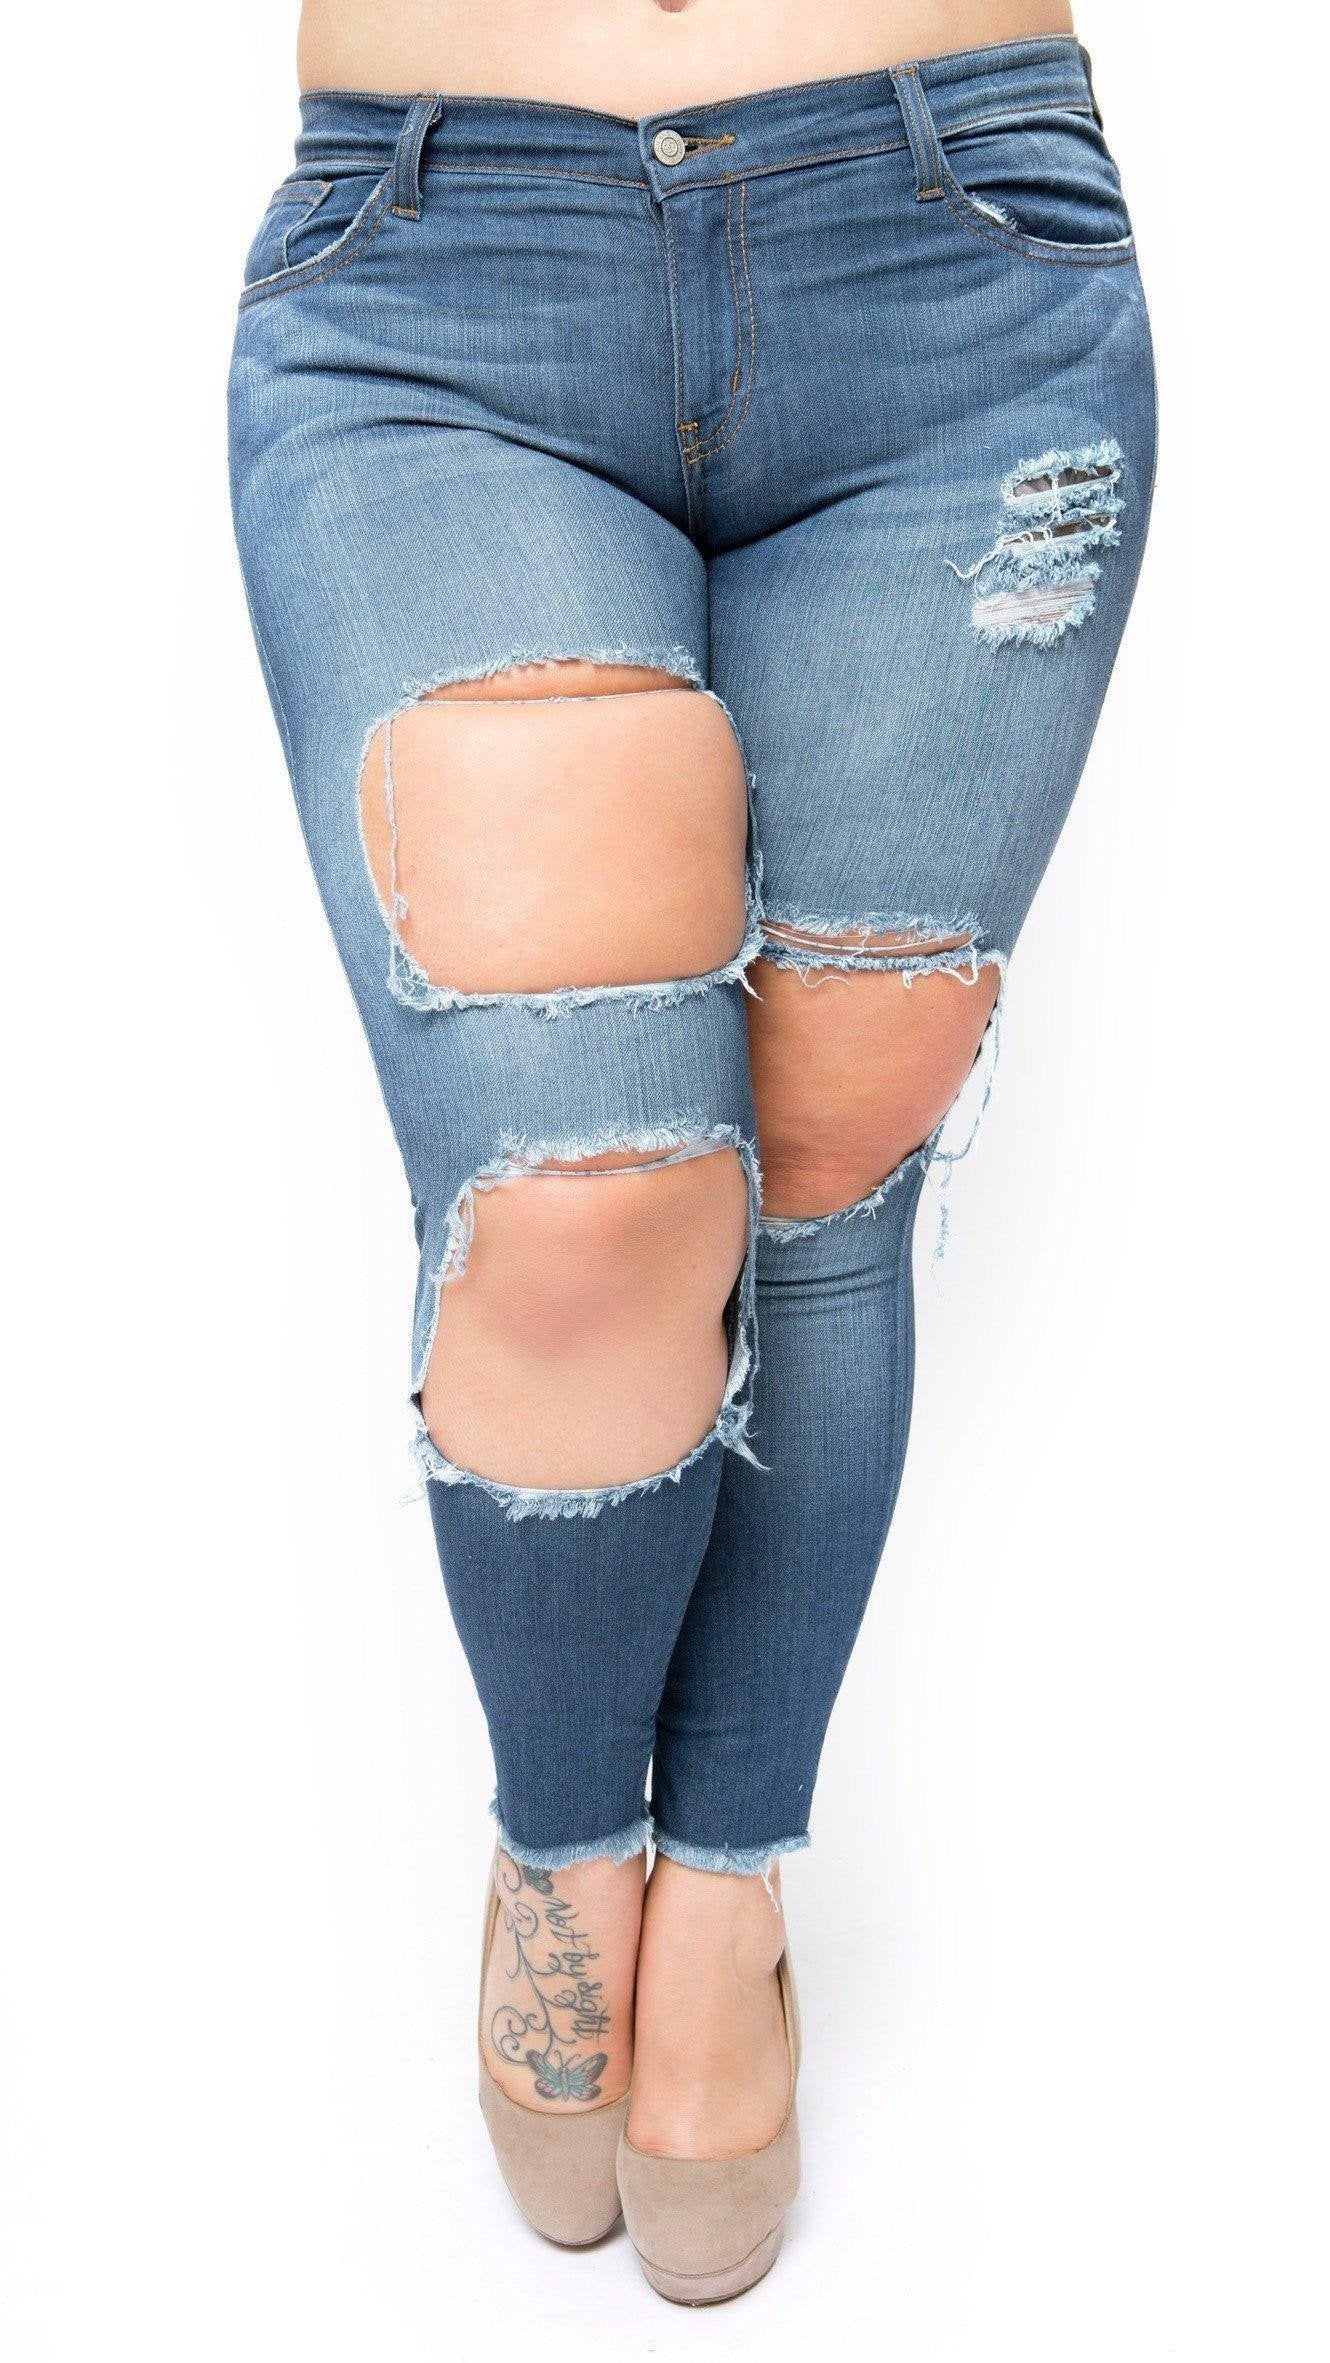 How to Distress Your Jeans in 8 Easy Steps